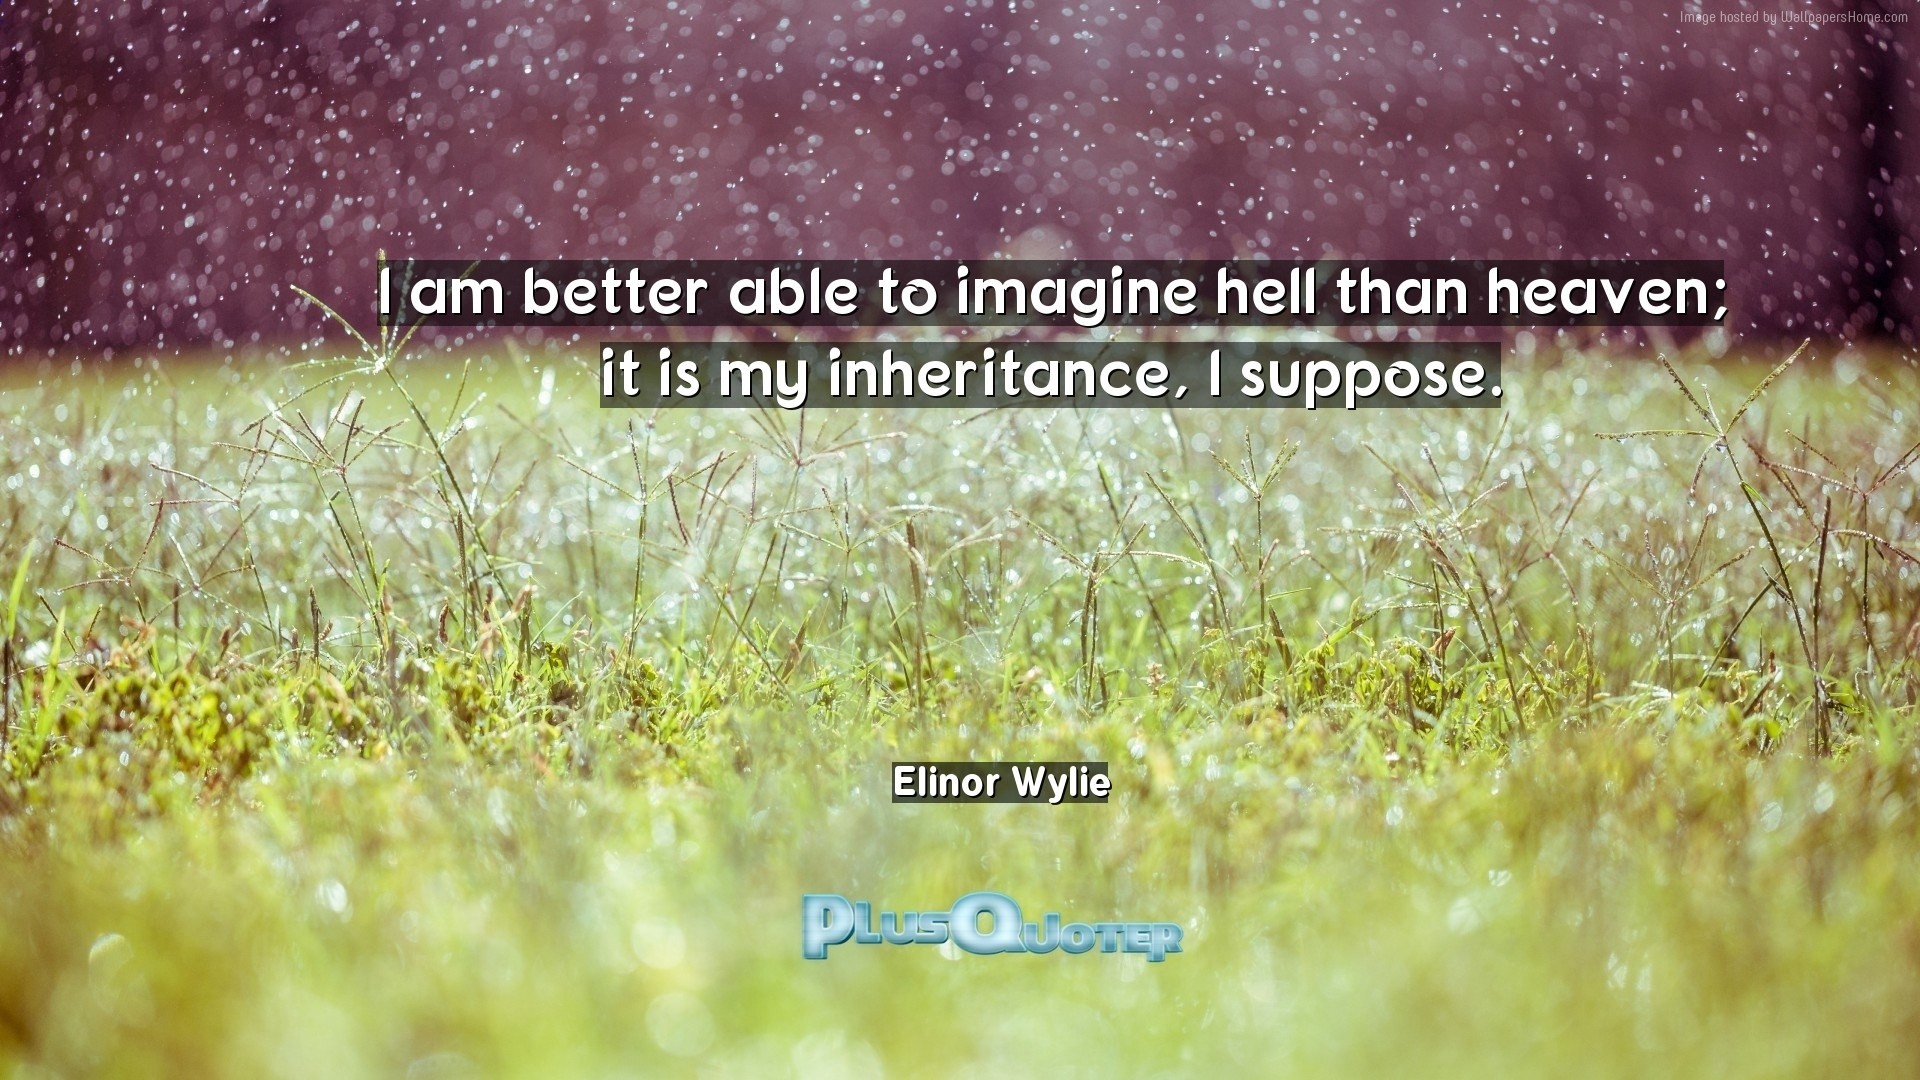 1920x1080 Download Wallpaper with inspirational Quotes- "I am better able to imagine  hell than heaven